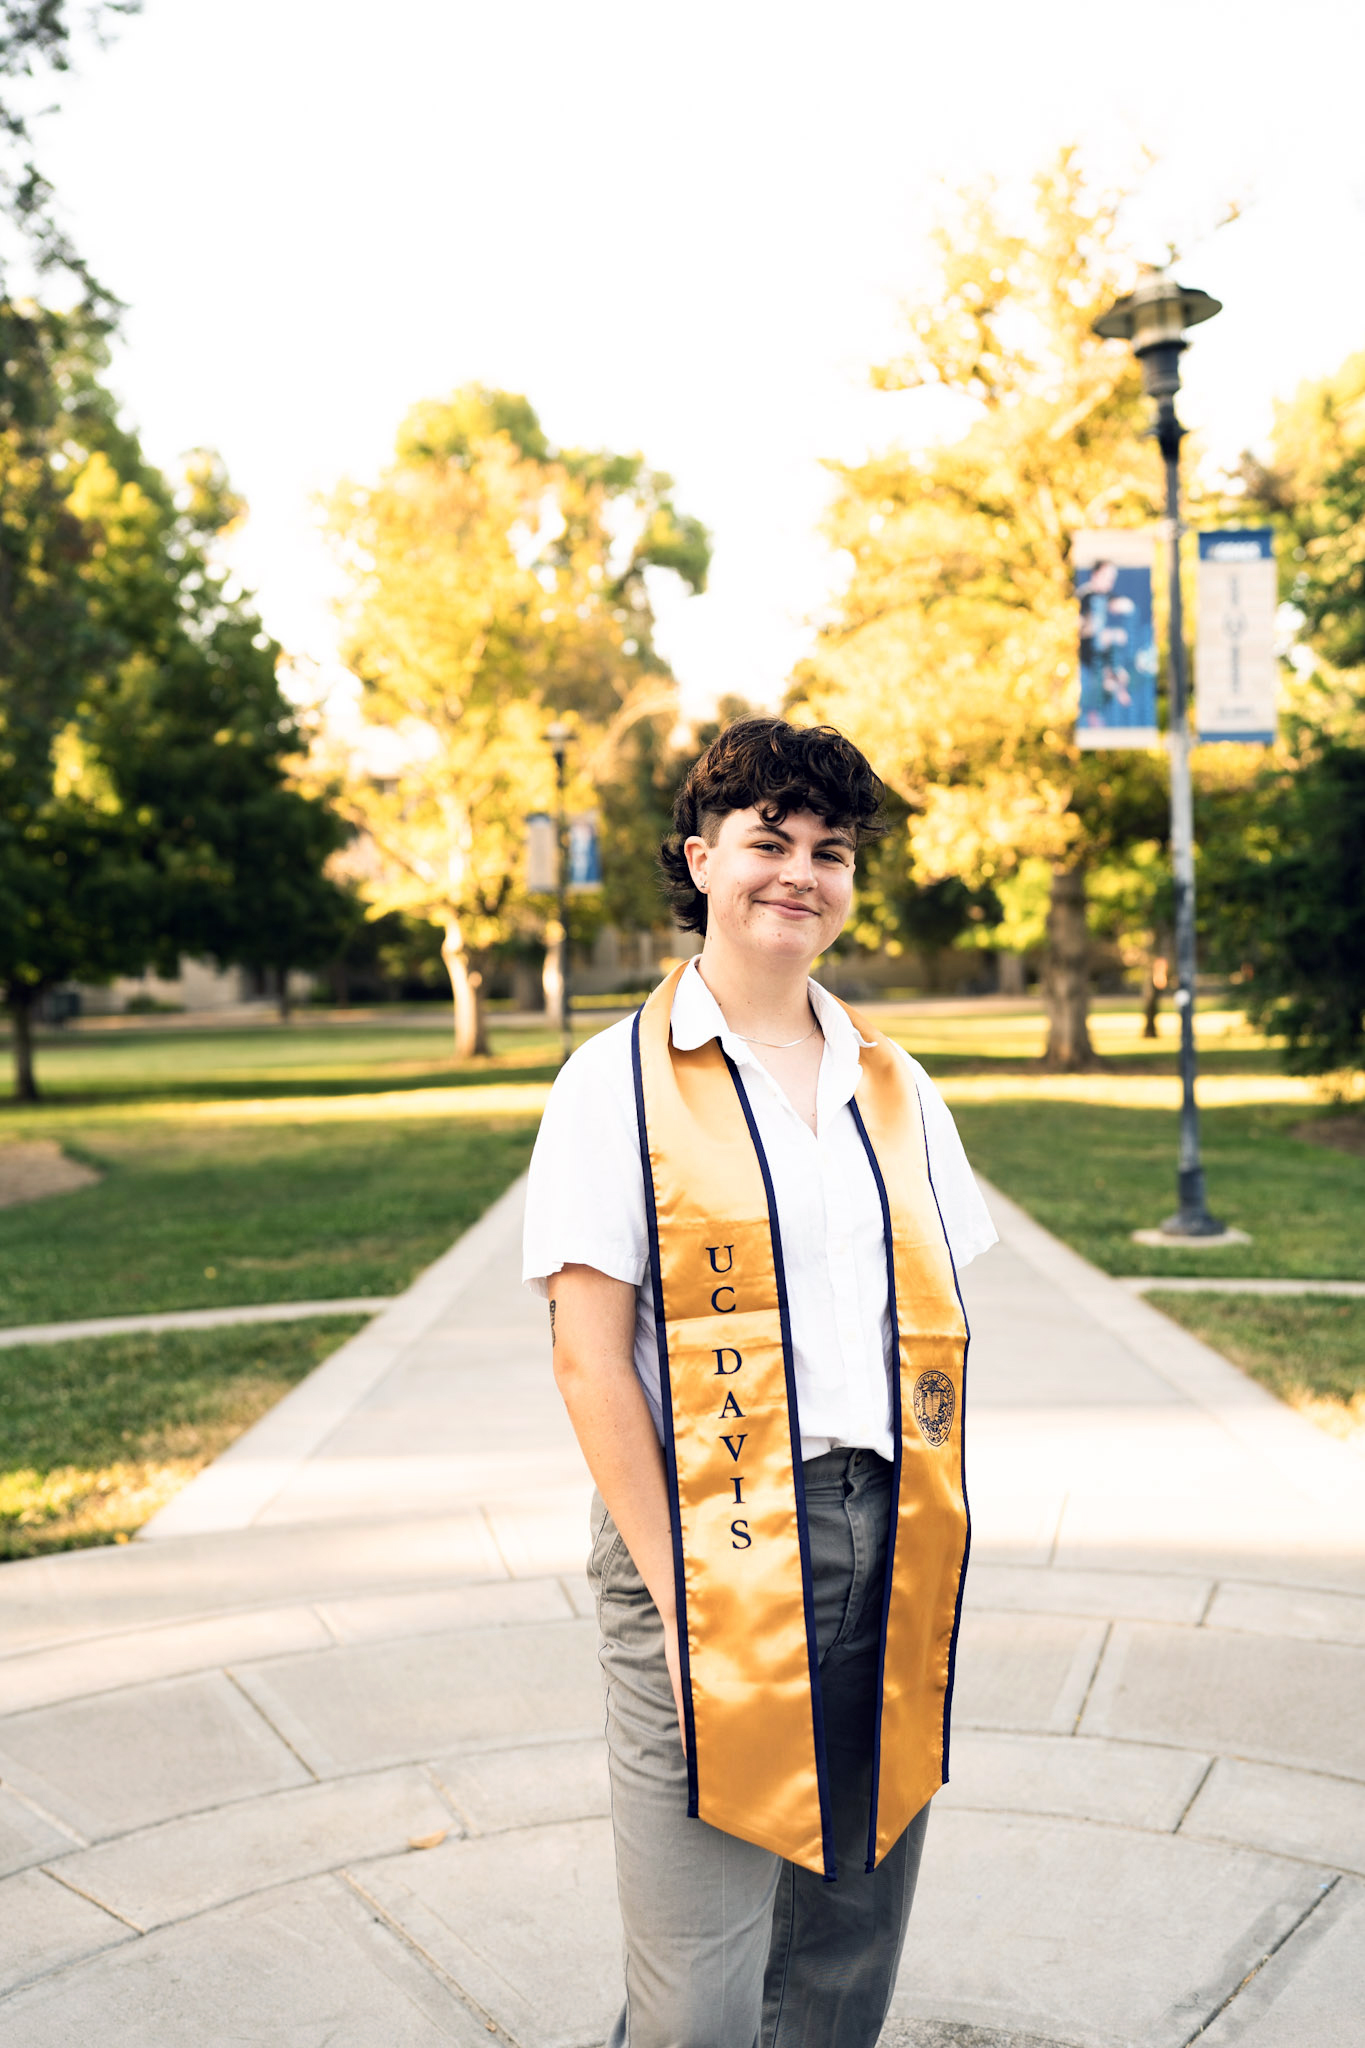 A graduation photo of Adri Penix, who is wearing a white shirt, khaki slacks, and a navy and gold UC Davis graduation stole, standing in front of a tree lined walkway.